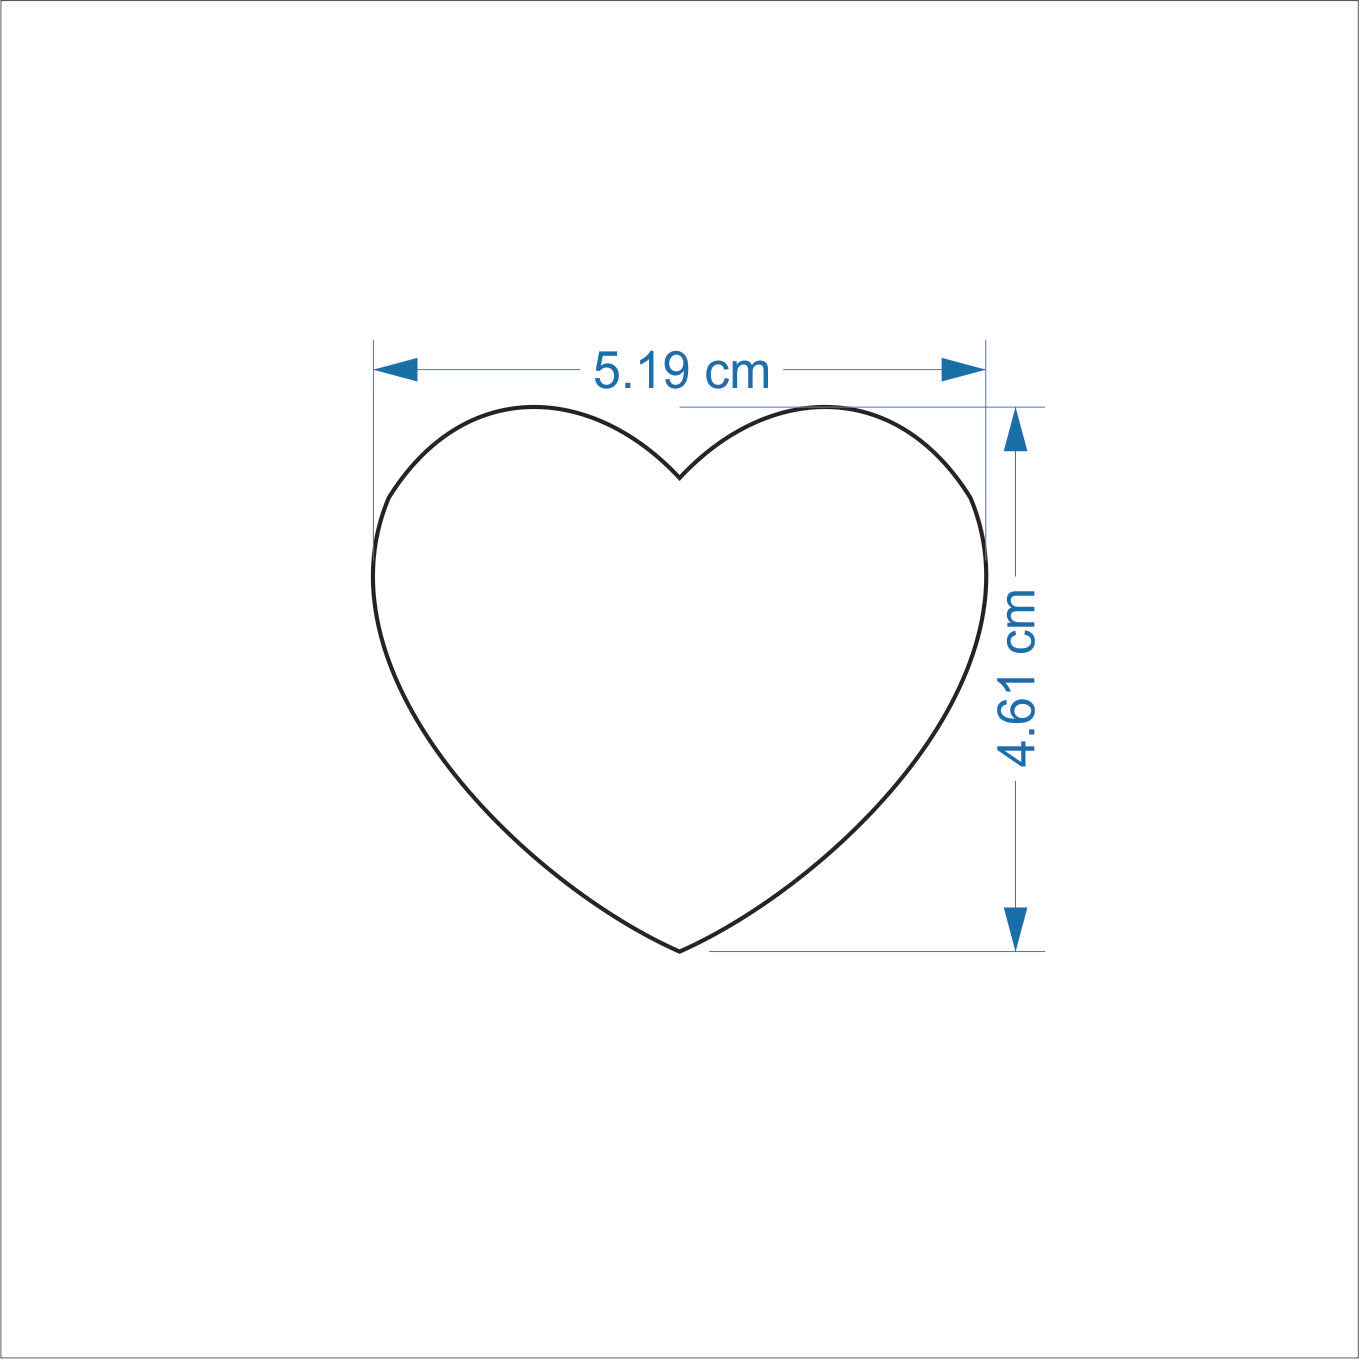 HEART SHAPE TAG (2x1.75 INCHES)